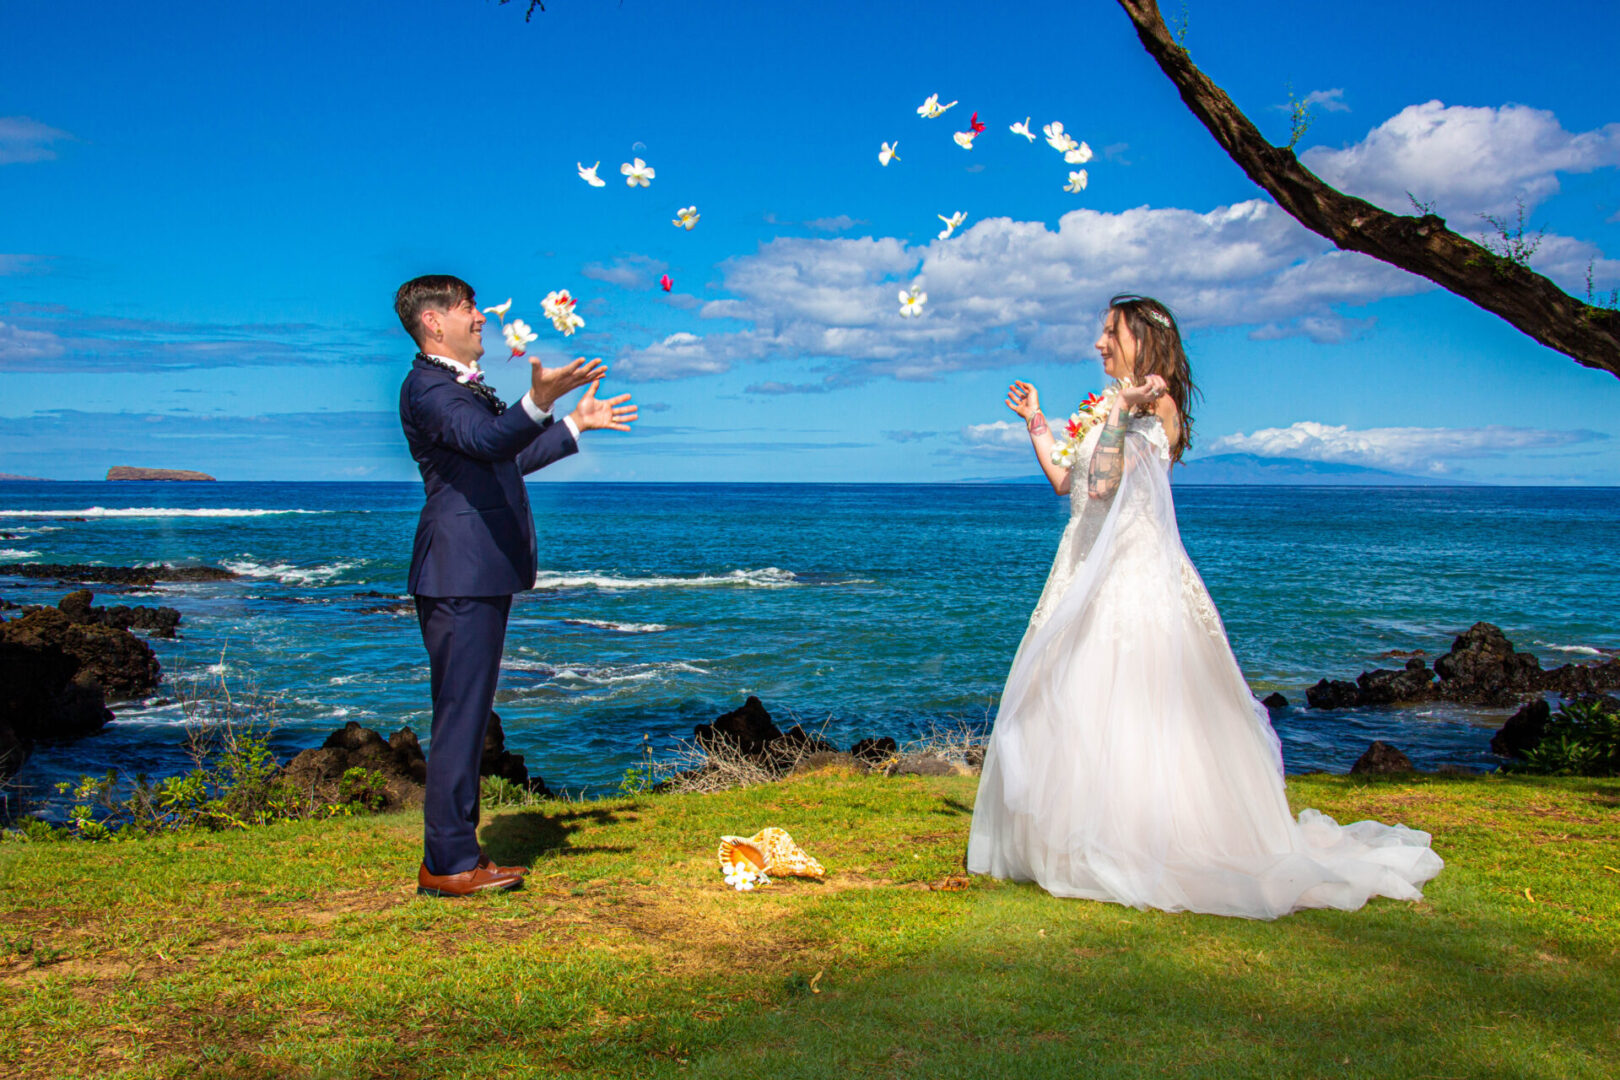 Wedding couple tosses flowers in the air to celebrate their wedding vows